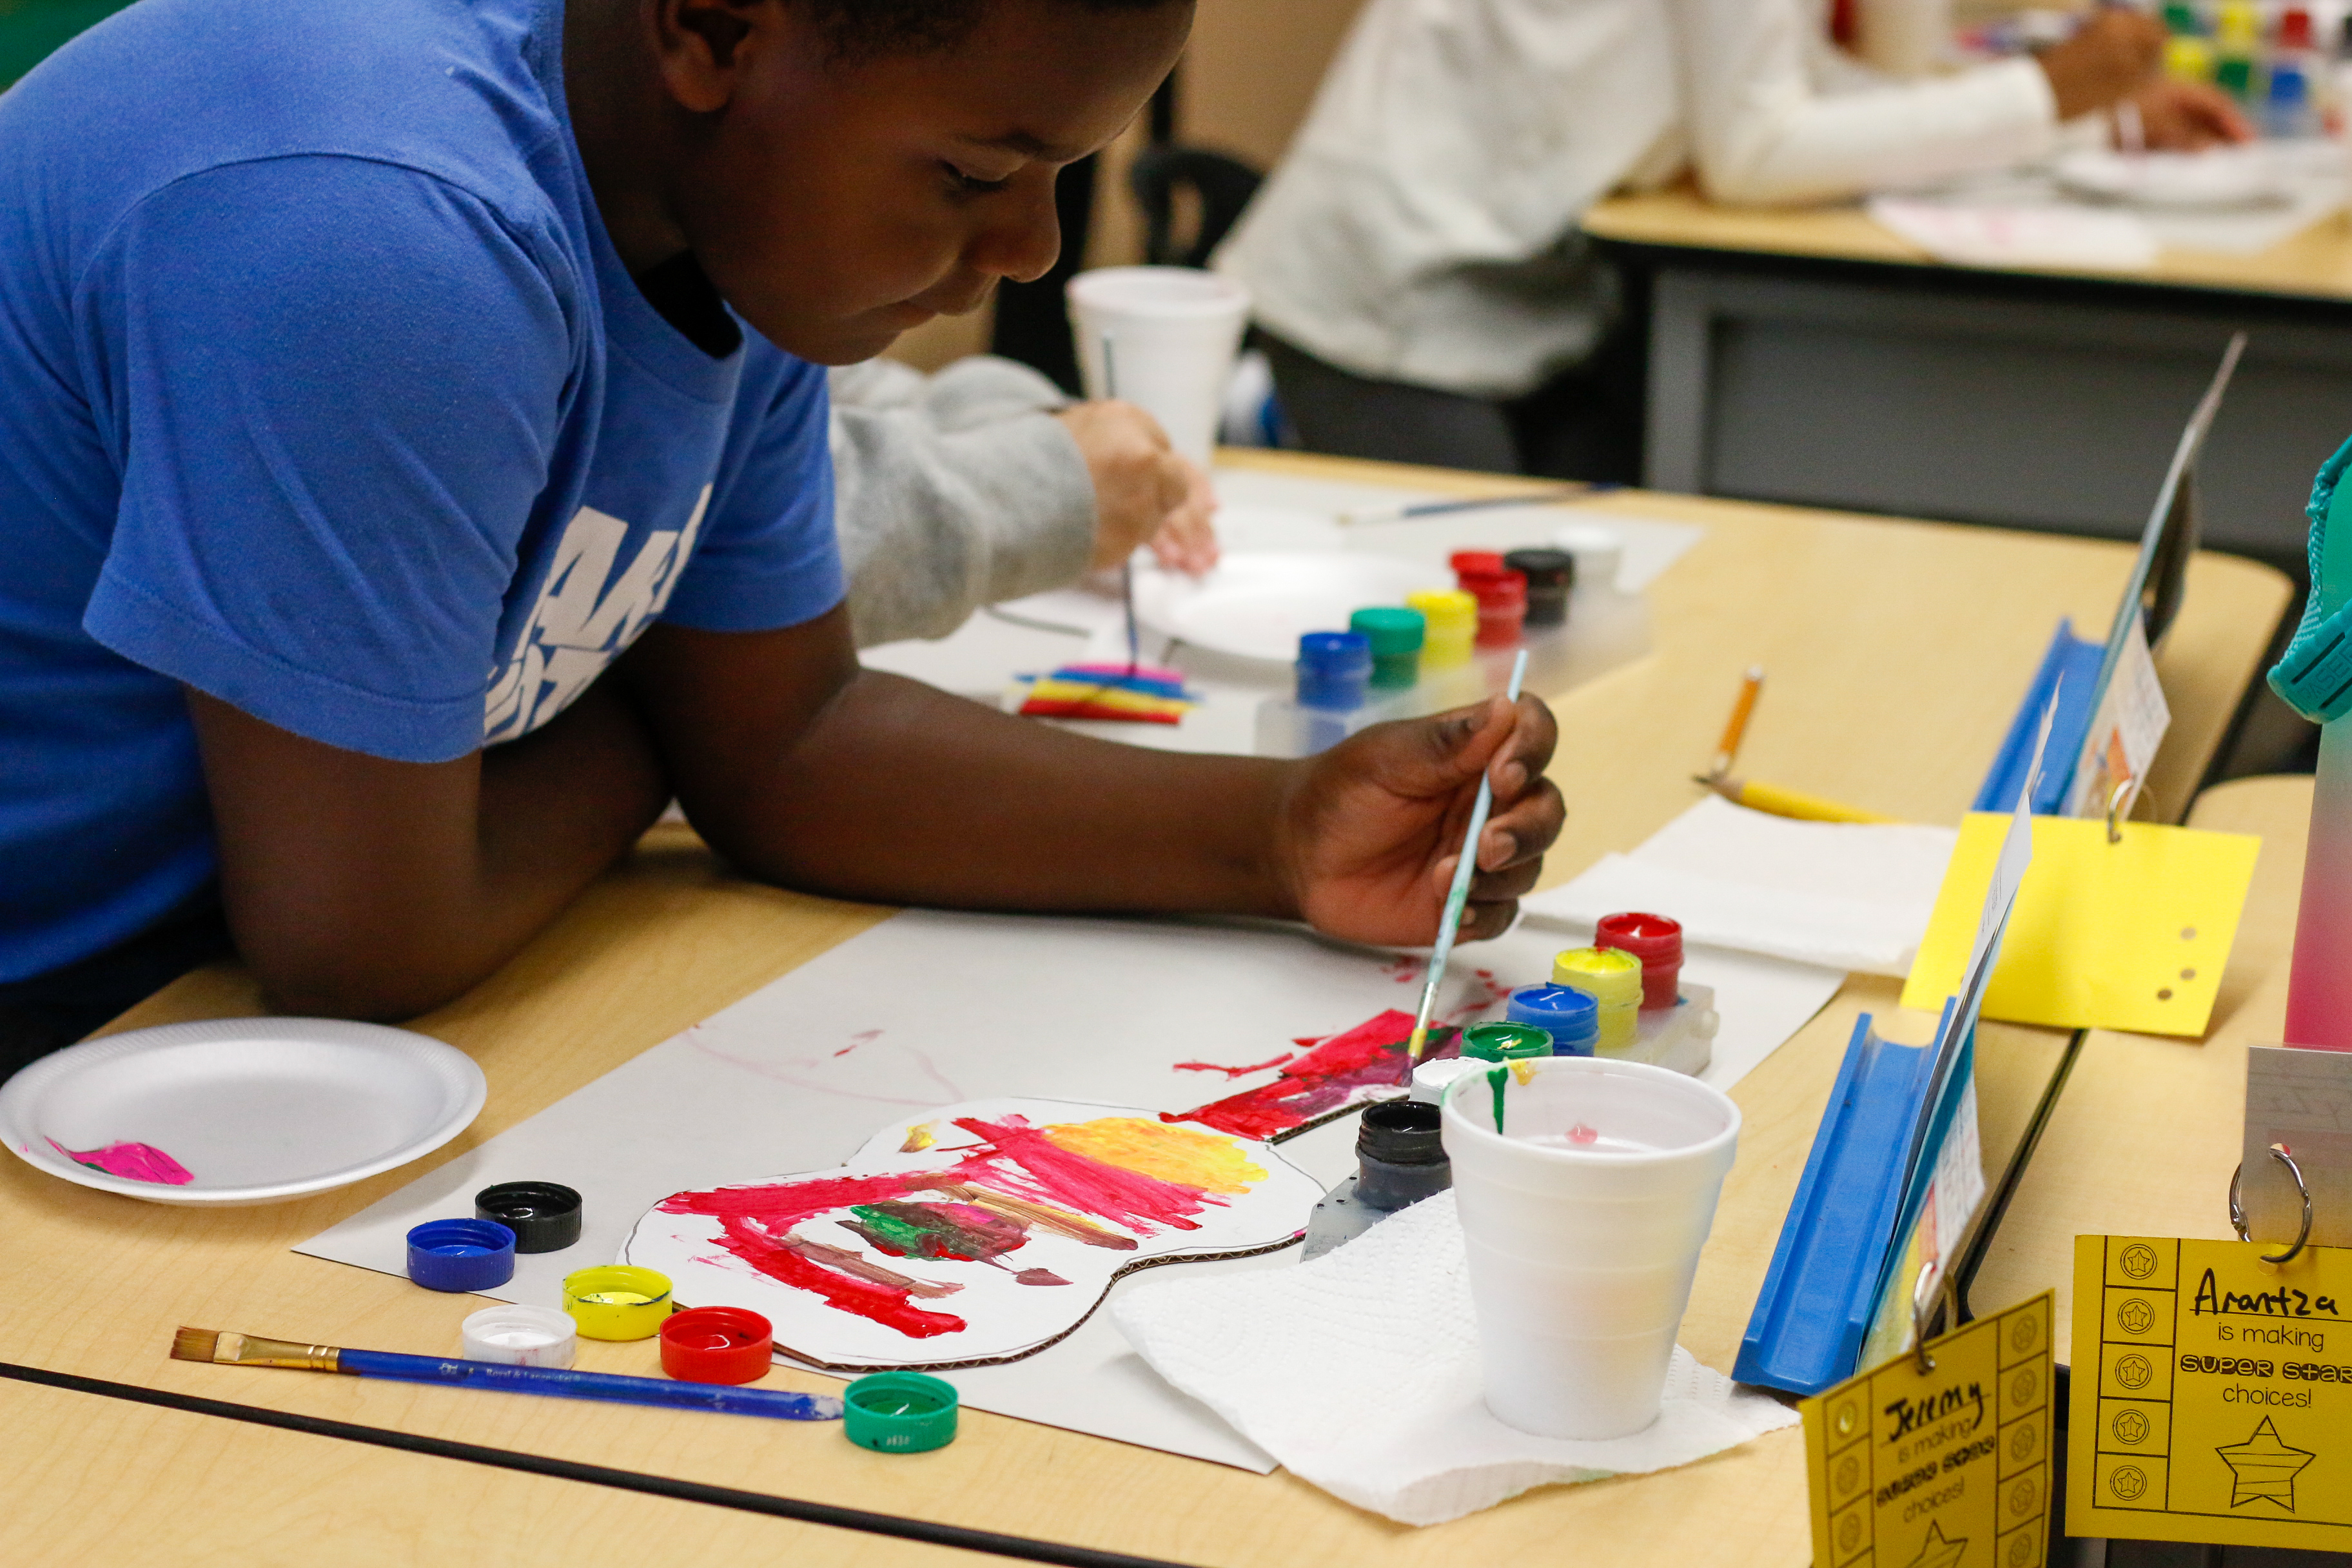 A Sibley Elementary scholar works on his art project